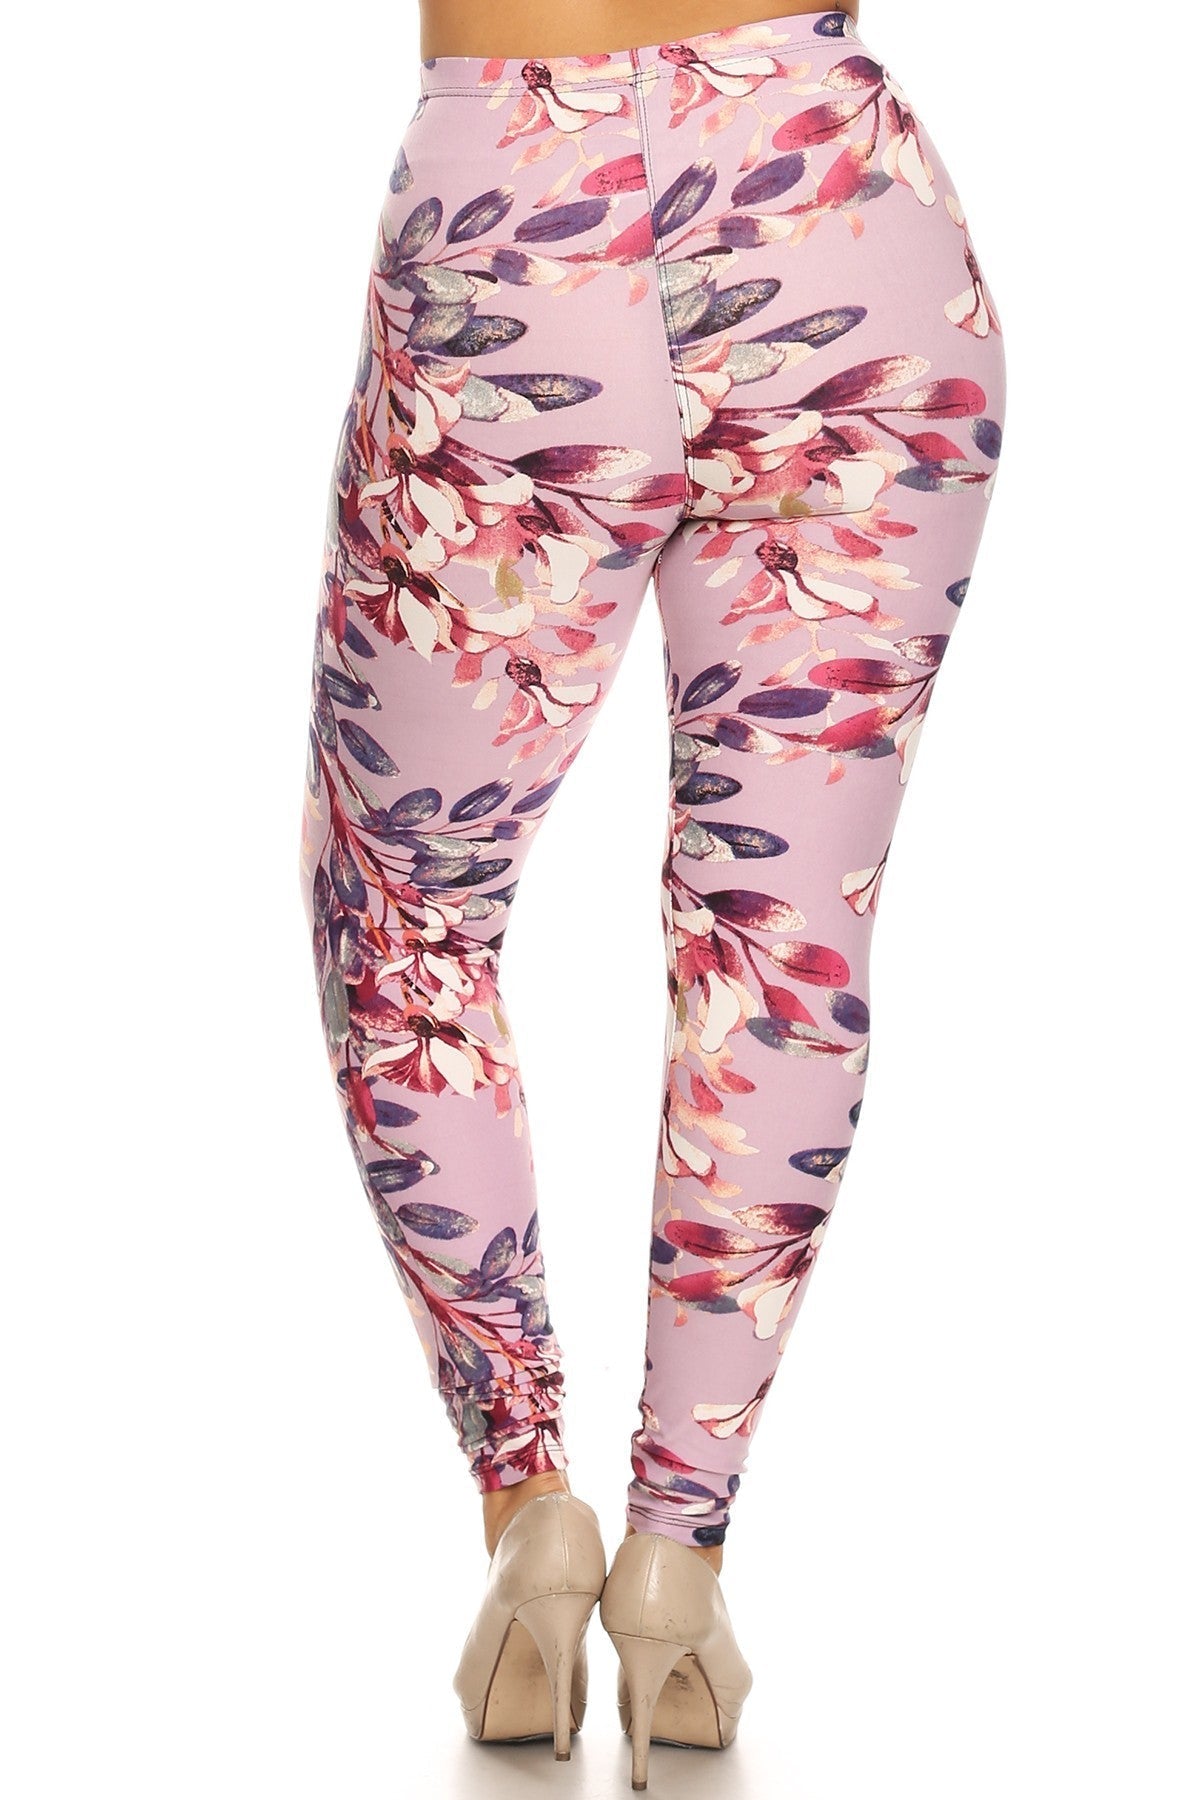 Plus Size Floral Print, Full Length Leggings In A Slim Fitting Style With A Banded High Waist Bottoms jehouze 